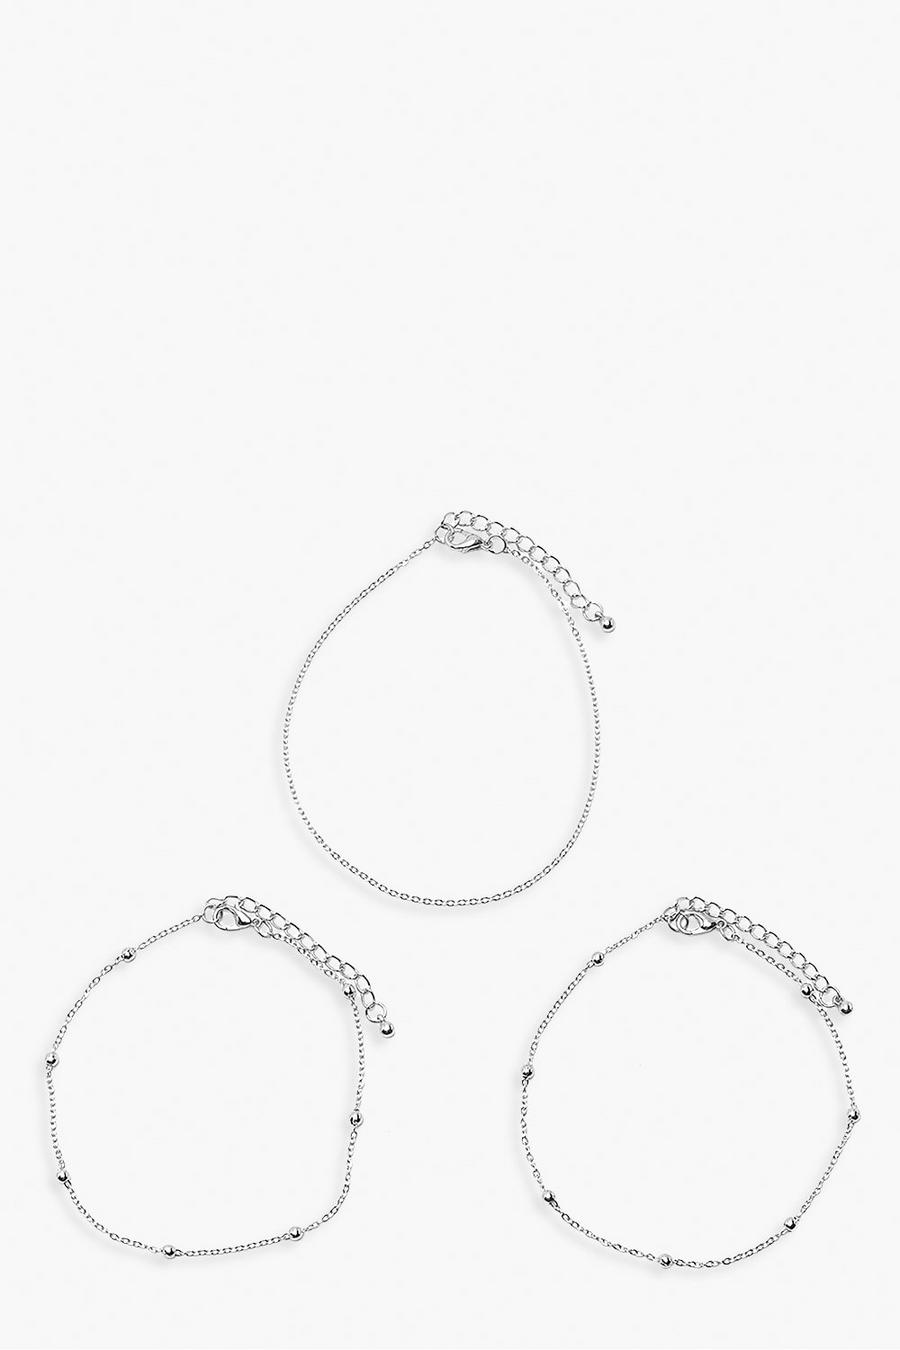 Silver argent Plus 3 Chain Anklet Pack